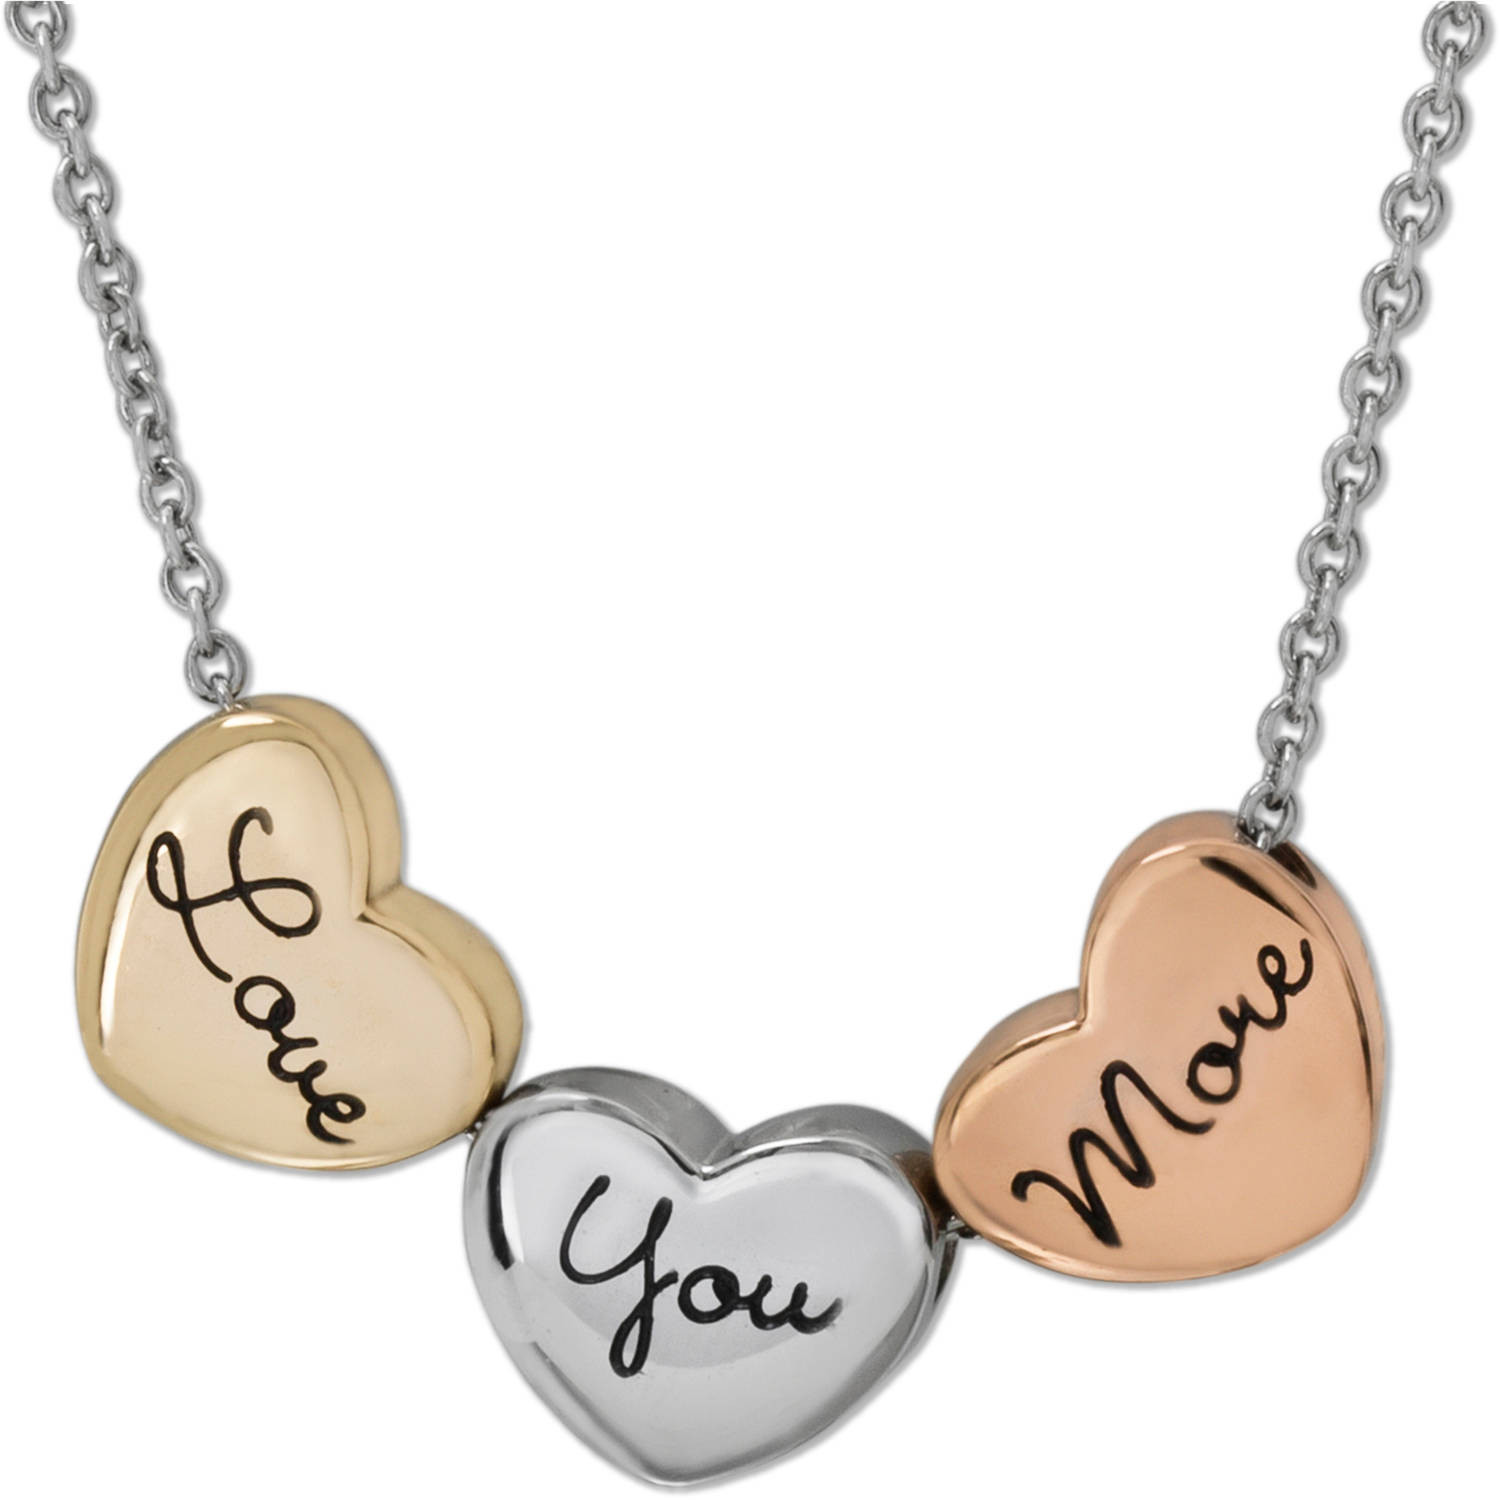 Walmart Heart Necklace
 Connections from Hallmark Stainless Steel Tricolor "Love